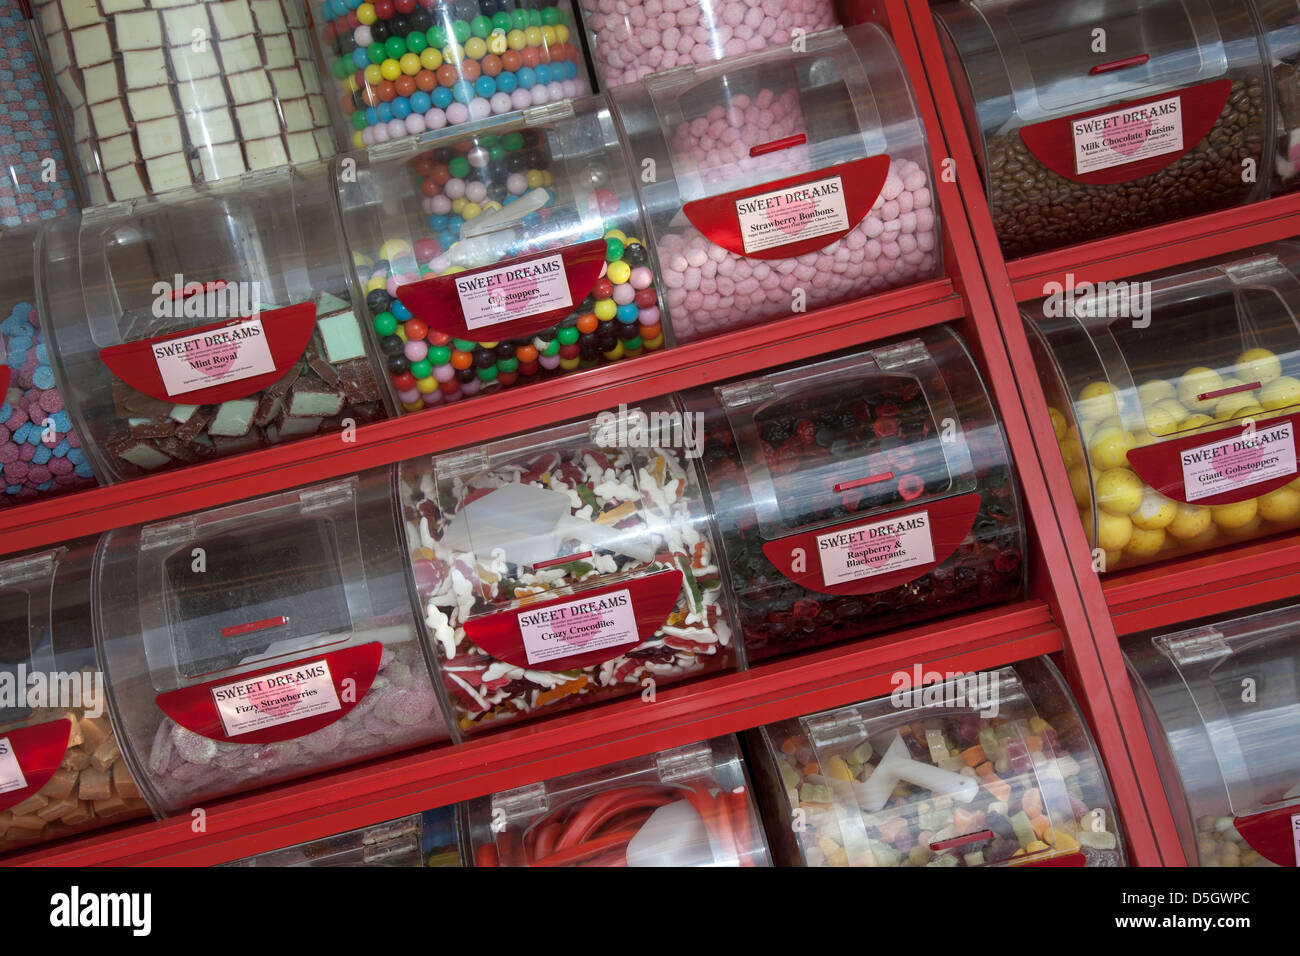 https://c8.alamy.com/comp/D5GWPC/shop-counter-display-with-jars-and-trays-of-pick-mix-sweets-D5GWPC.jpg